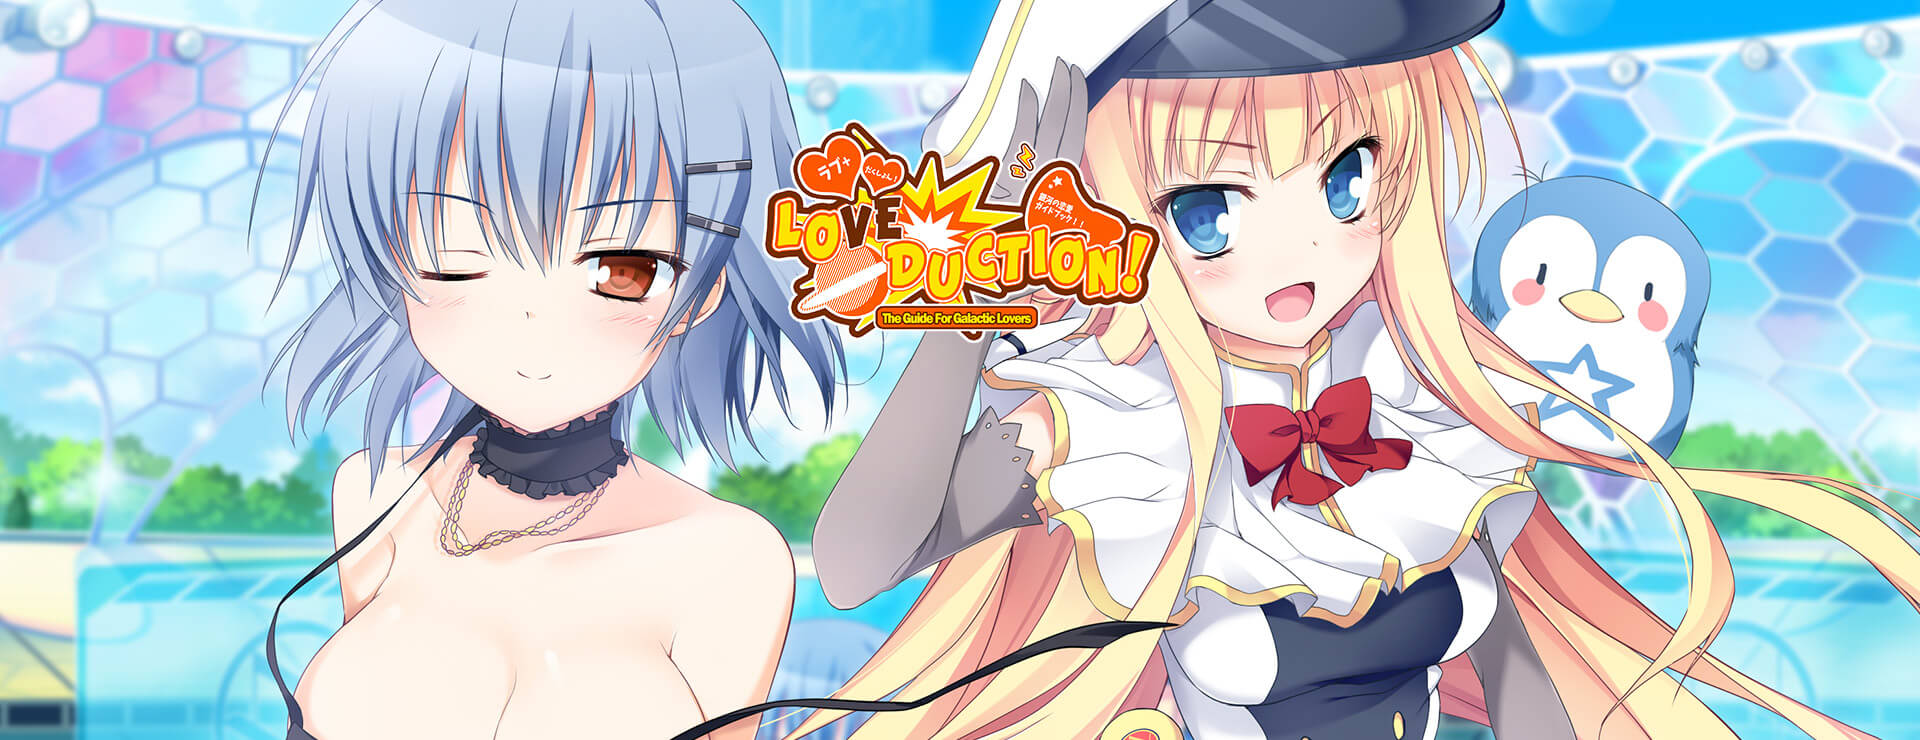 Love Duction! The Guide for Galactic Lovers - Visual Novel Game